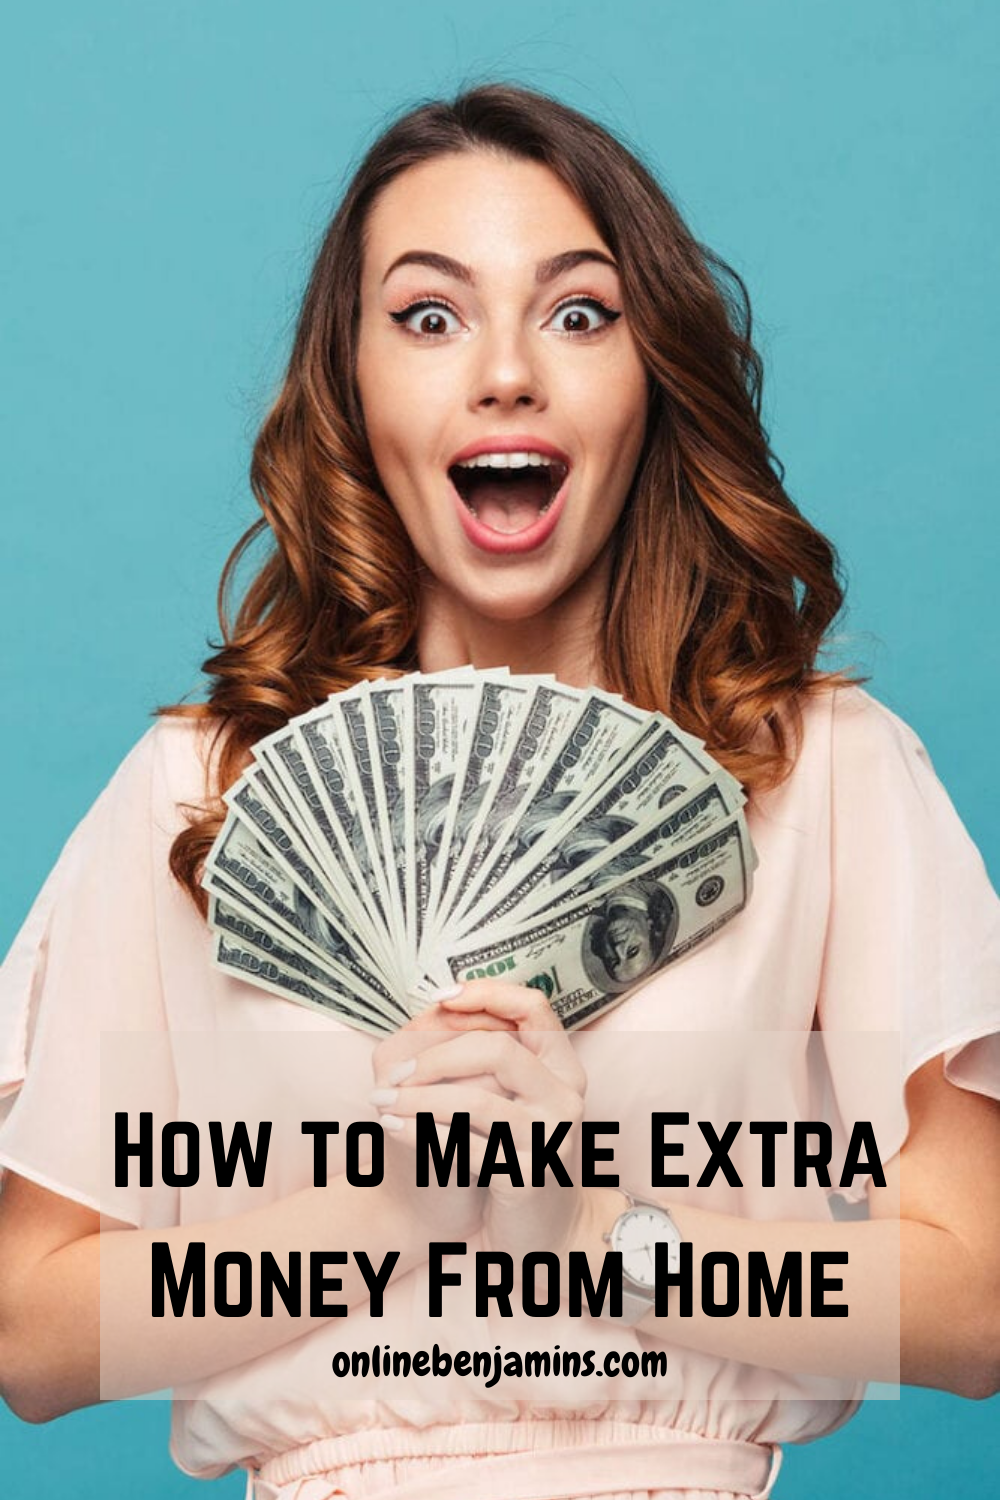 how to make extra money from home - Lady holding a handful of cash